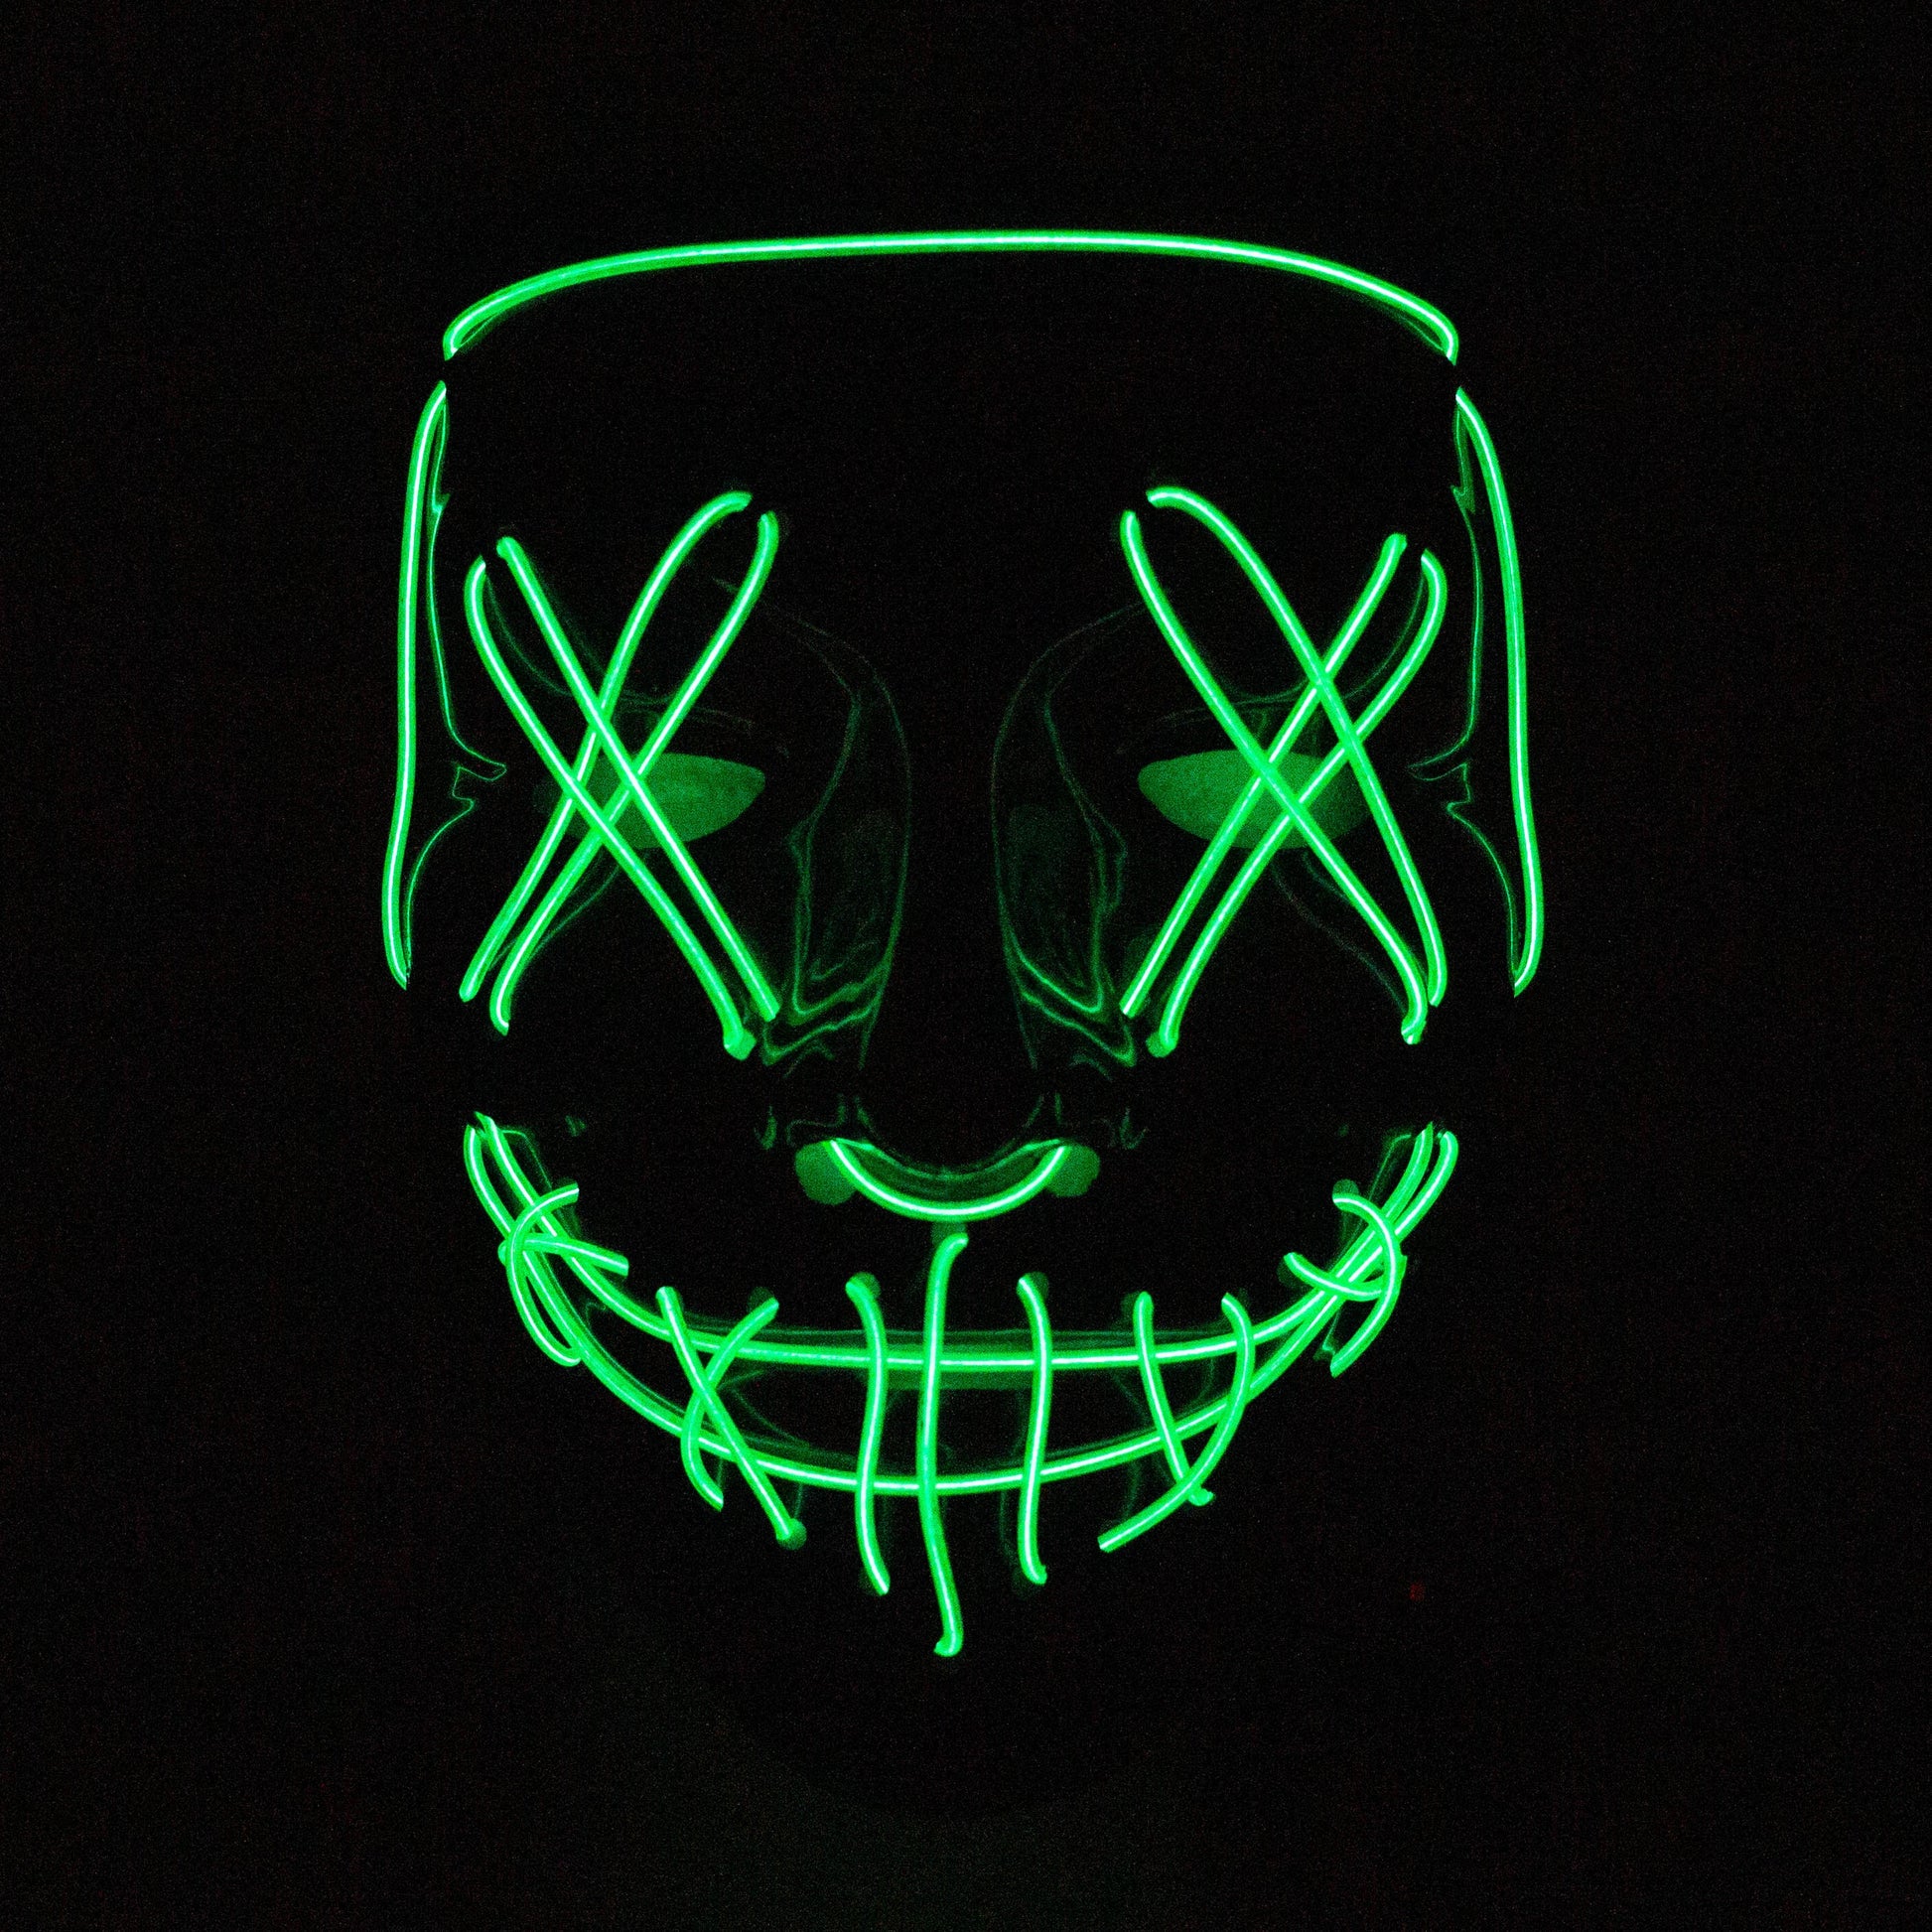 LED Neon Mask for party or Halloween Costume_10